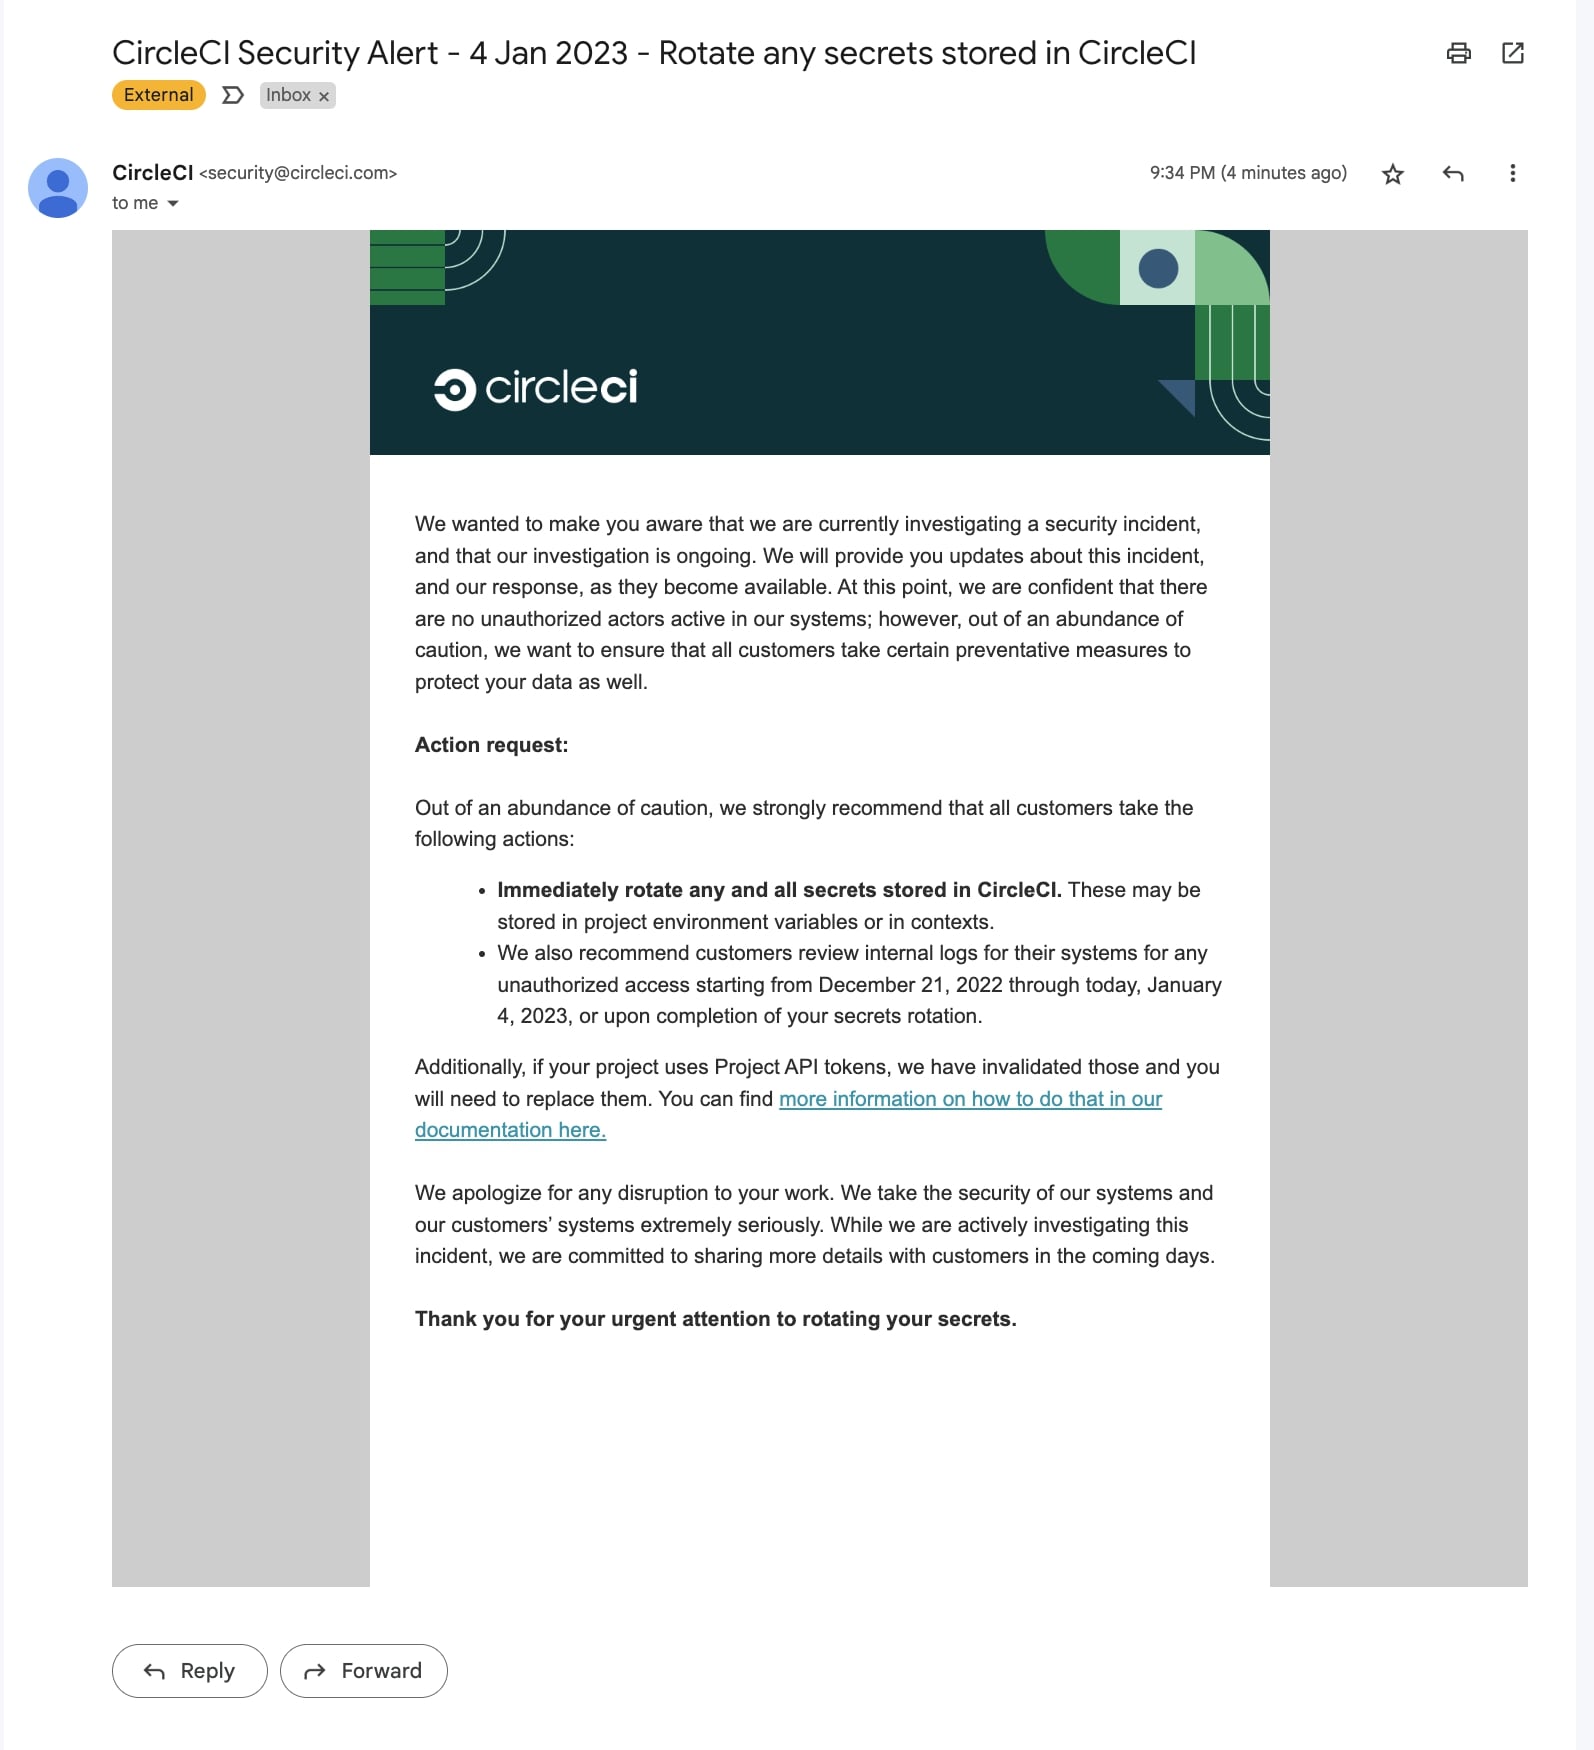 CircleCI disclosed a security incident and advised users to rotate their secrets stored in the platform.